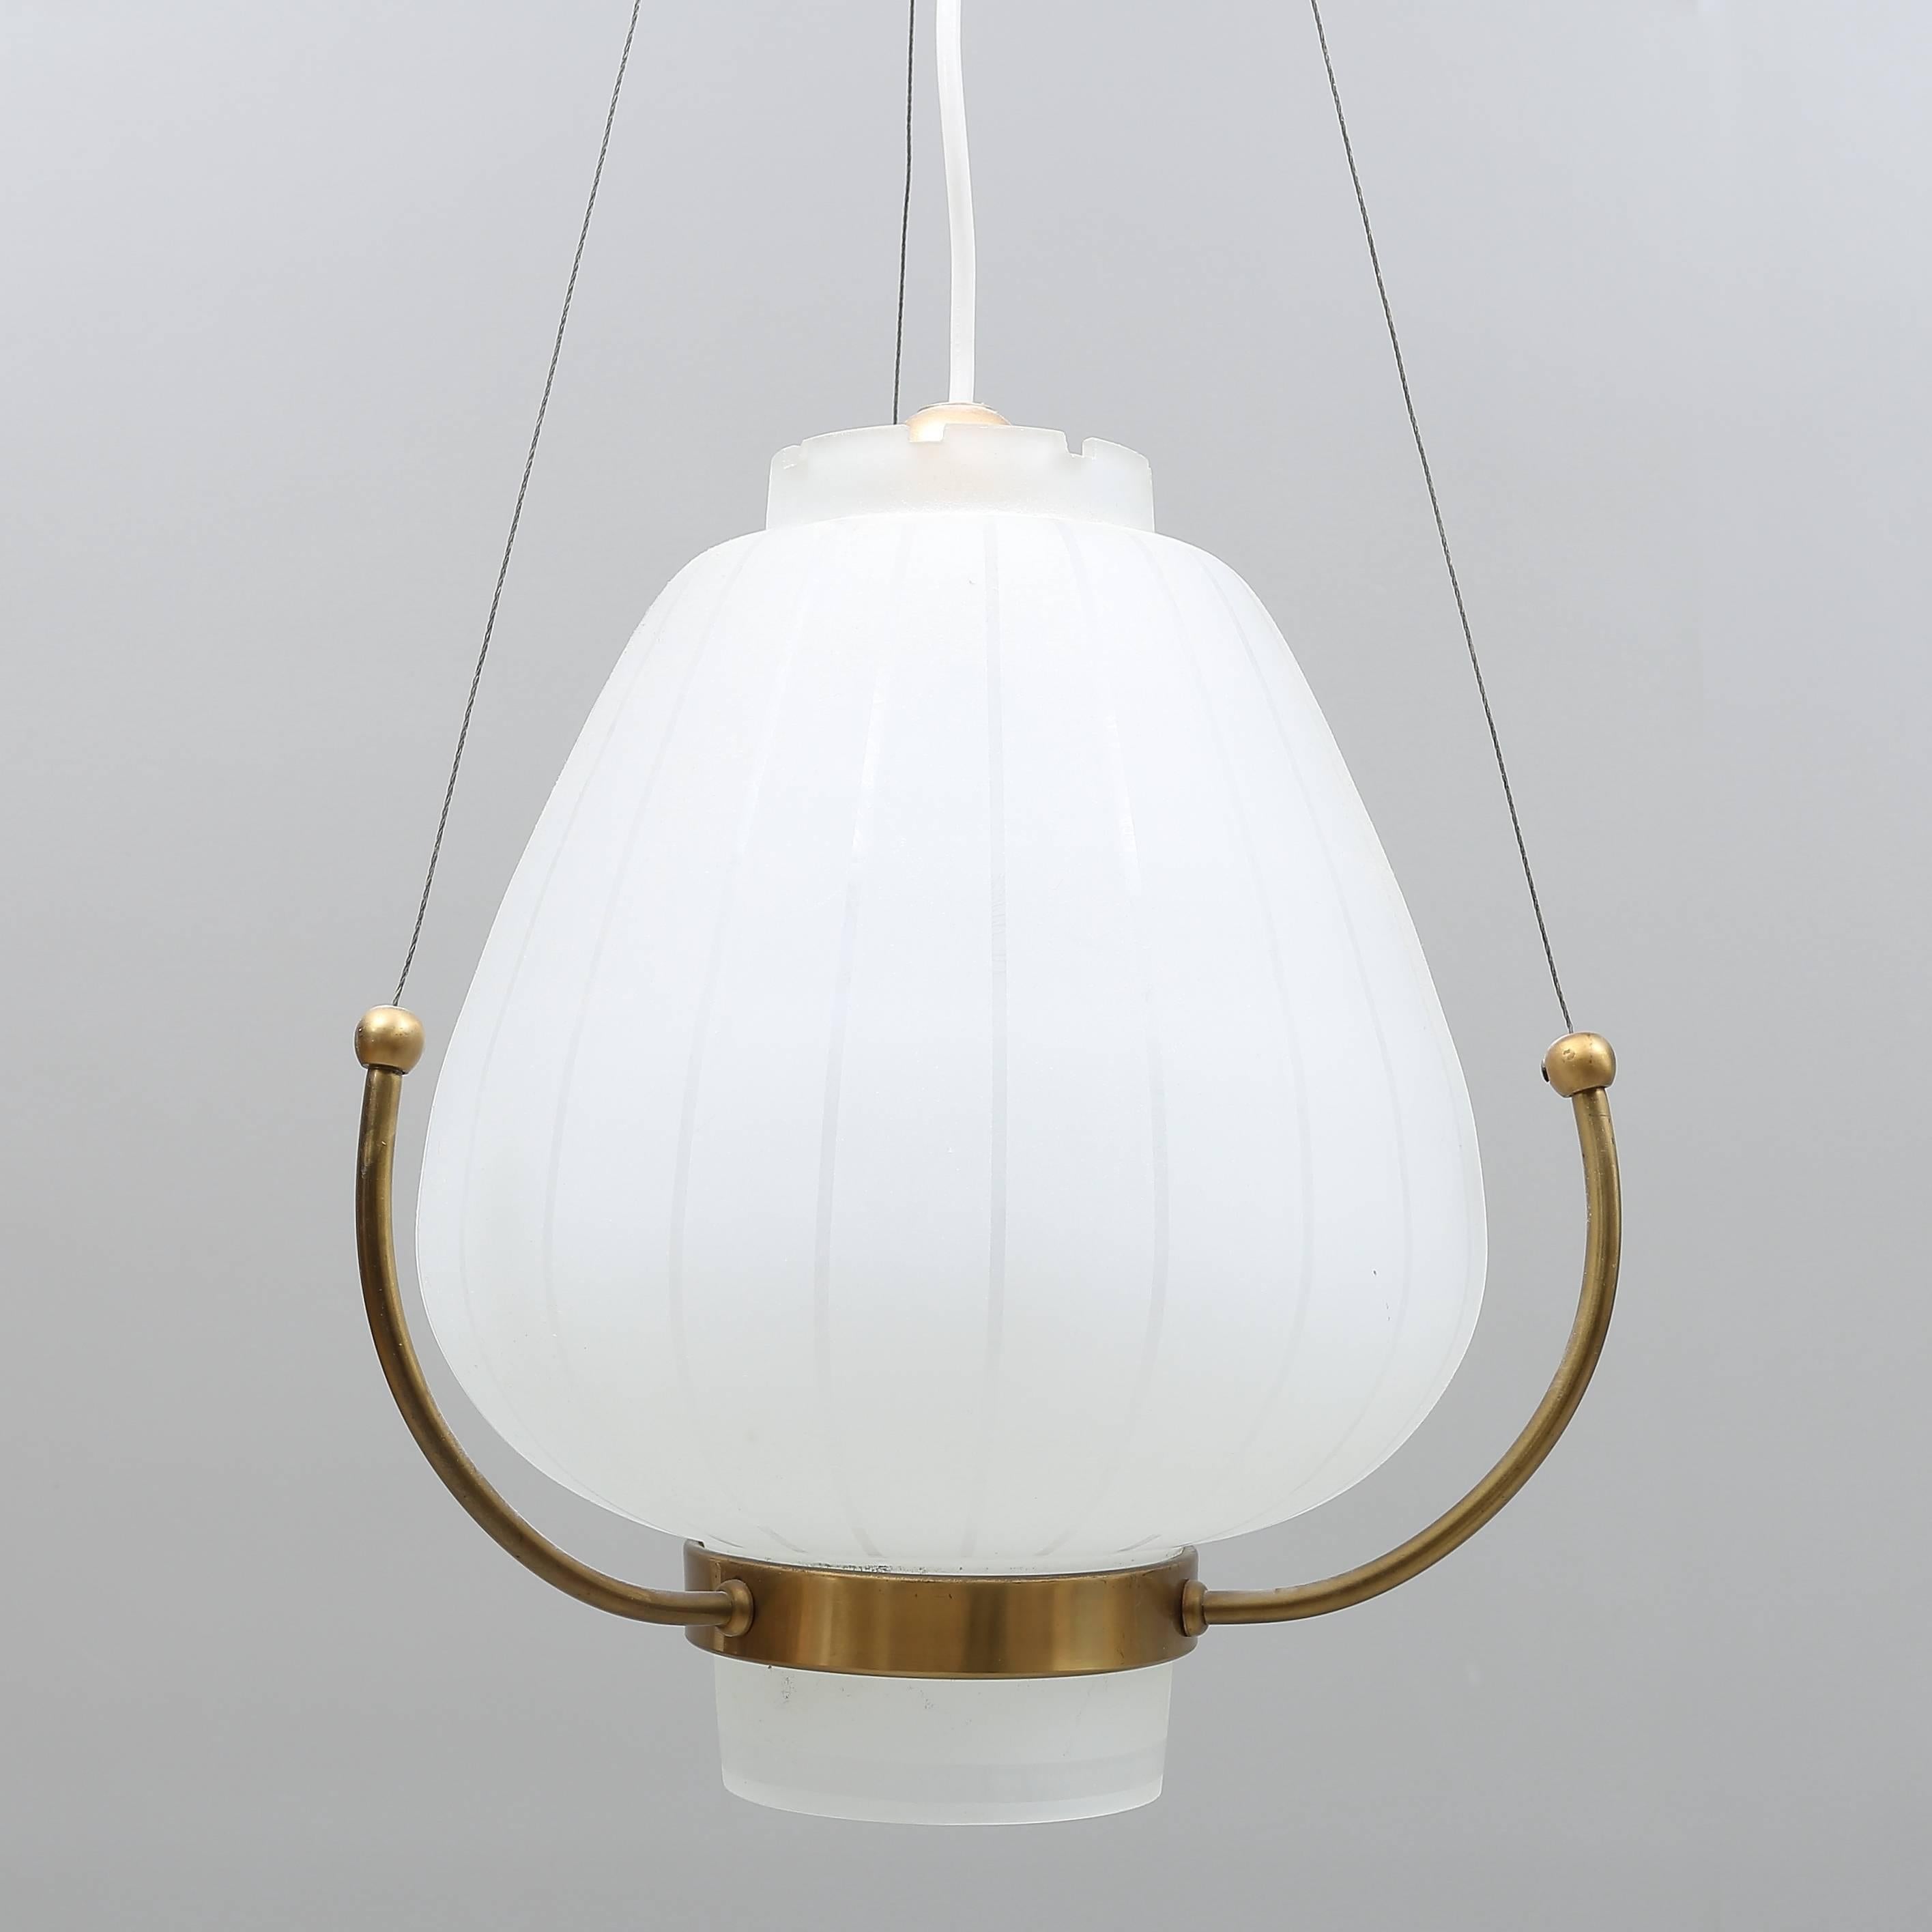 Scandinavian pendant in frosted glass and brass, circa 1940.
Rewiring available upon request.
Measures: glass shade H - 12.5